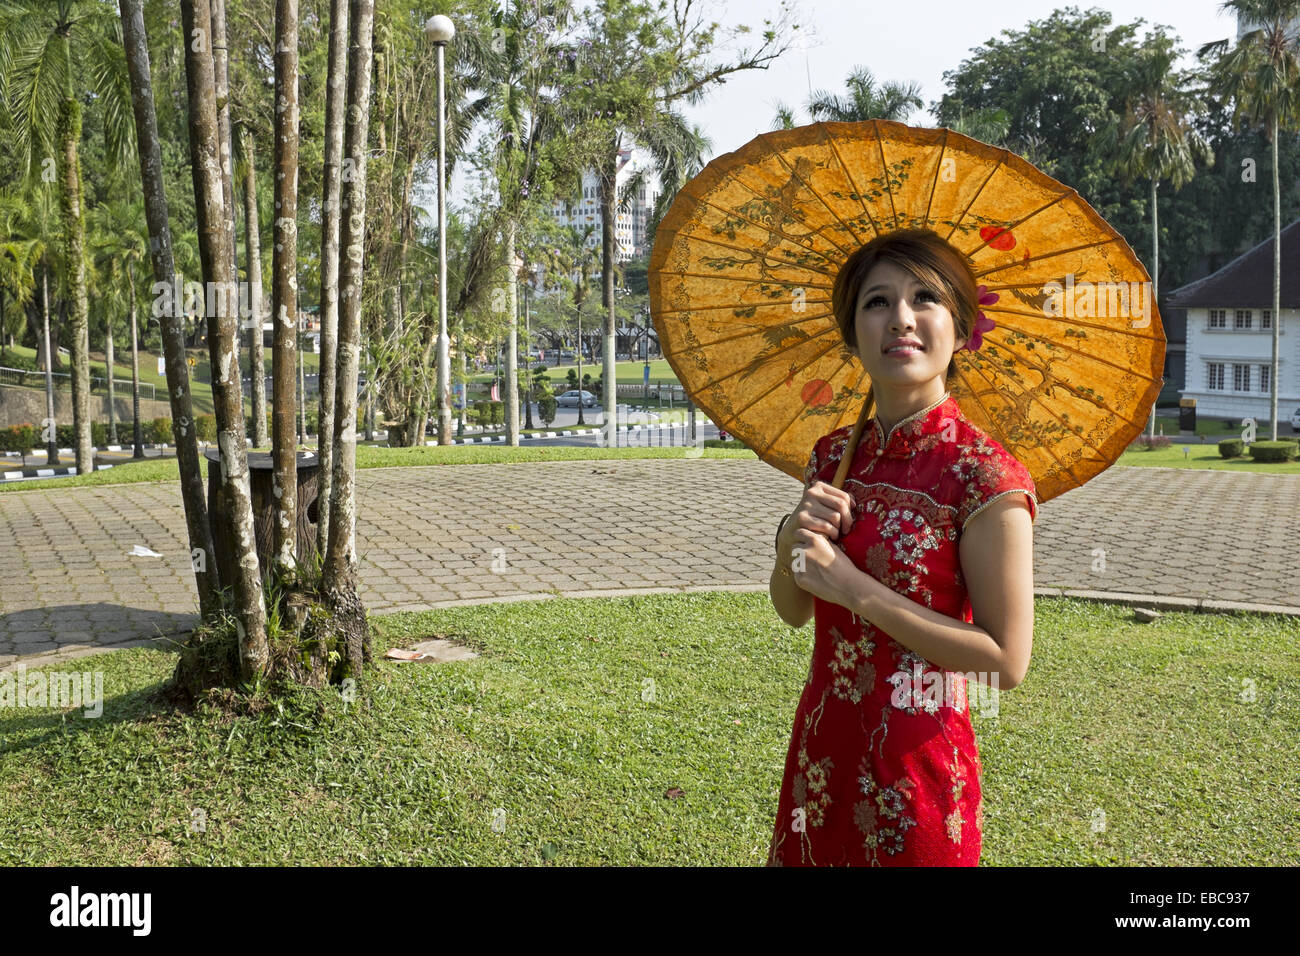 Chinese woman in traditional cheongsam outfit. Image taken at Sarawak